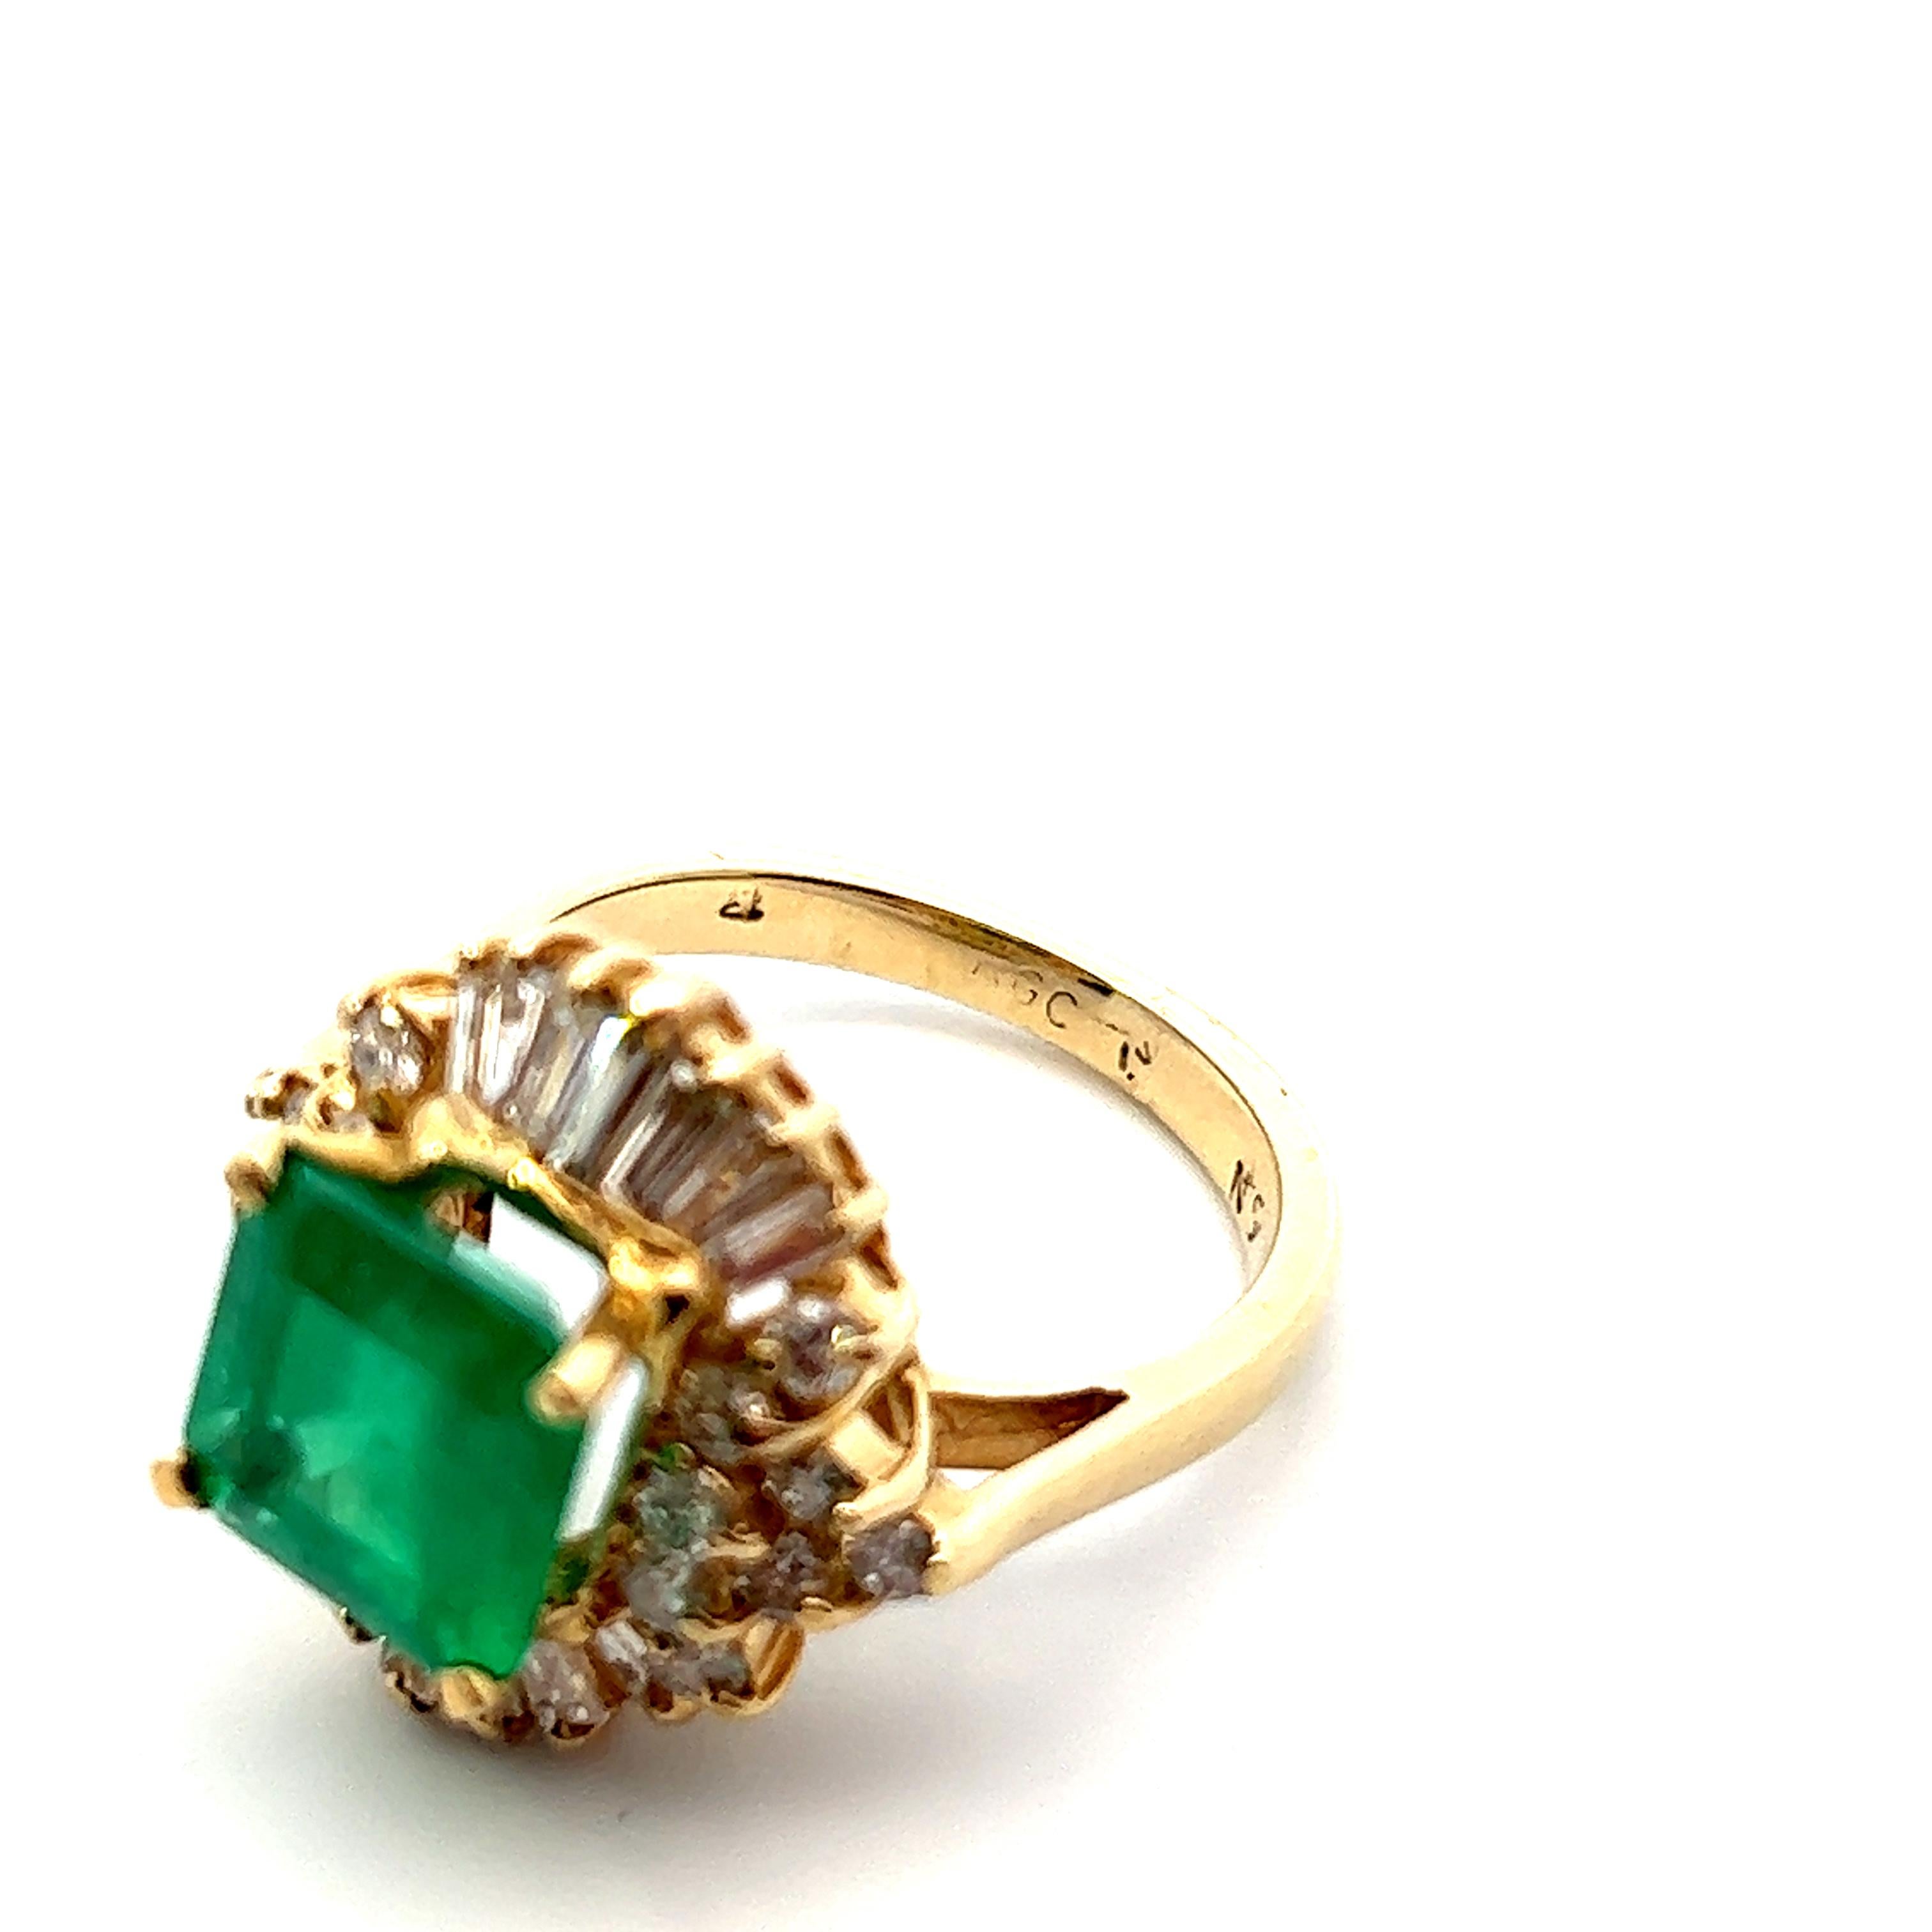 This beautiful Retro ring from the 1960s features both emerald and diamond, as well a 14k and 18k yellow gold prongs. The tasteful blend of emerald and diamond creates a fashionable statement ring that captivates attention. Emerald is known as the